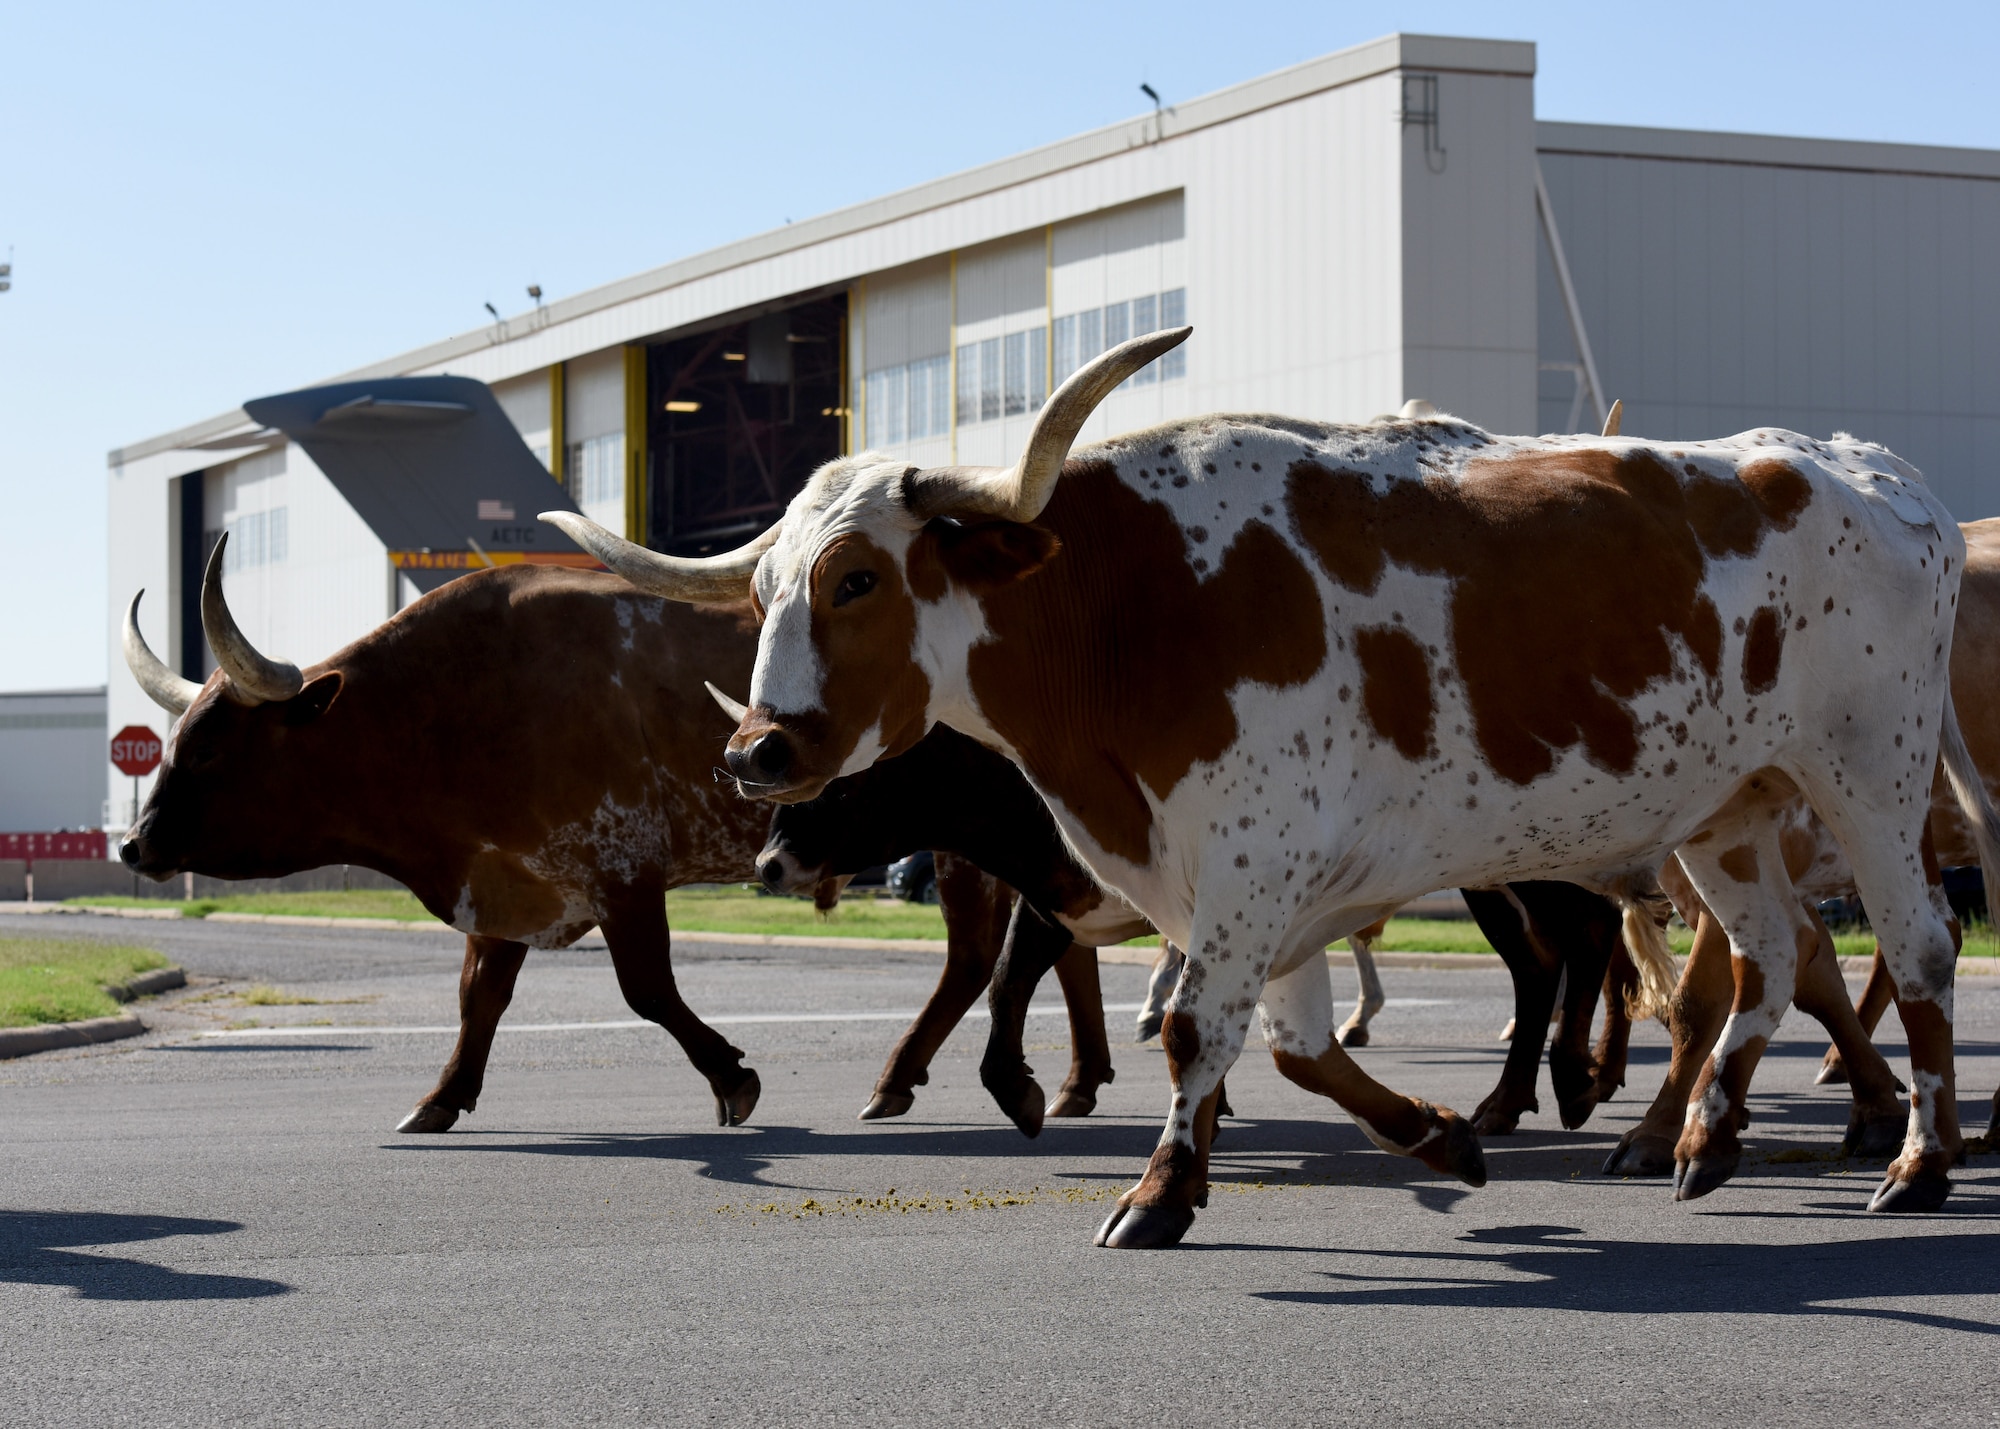 Texas Longhorn cattle are herded through base during the 18th annual Cattle Drive, Aug. 25, 2016, at Altus Air Force Base, Okla. Approximately 18 Texas Longhorn cattle were driven through Altus AFB at this year's base Cattle Drive which provided opportunity for community members to share part of their culture with the Airmen and their families. (U.S. Air Force photo by Senior Airman Nathan Clark/Released)